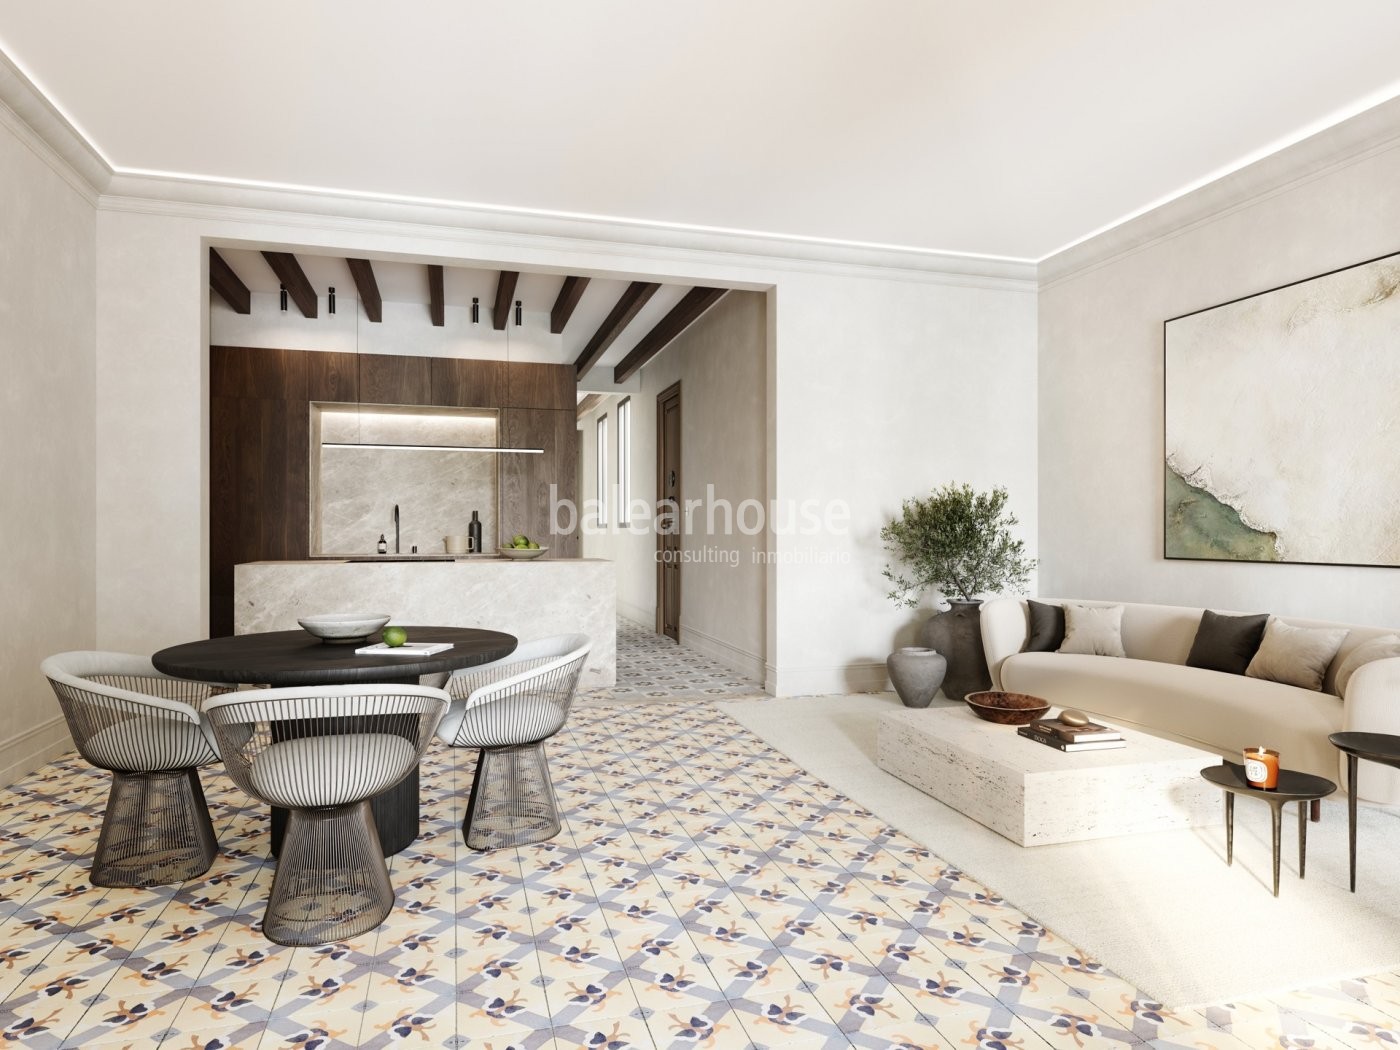 Fantastic flat in a historic building overlooking the old town of Palma.